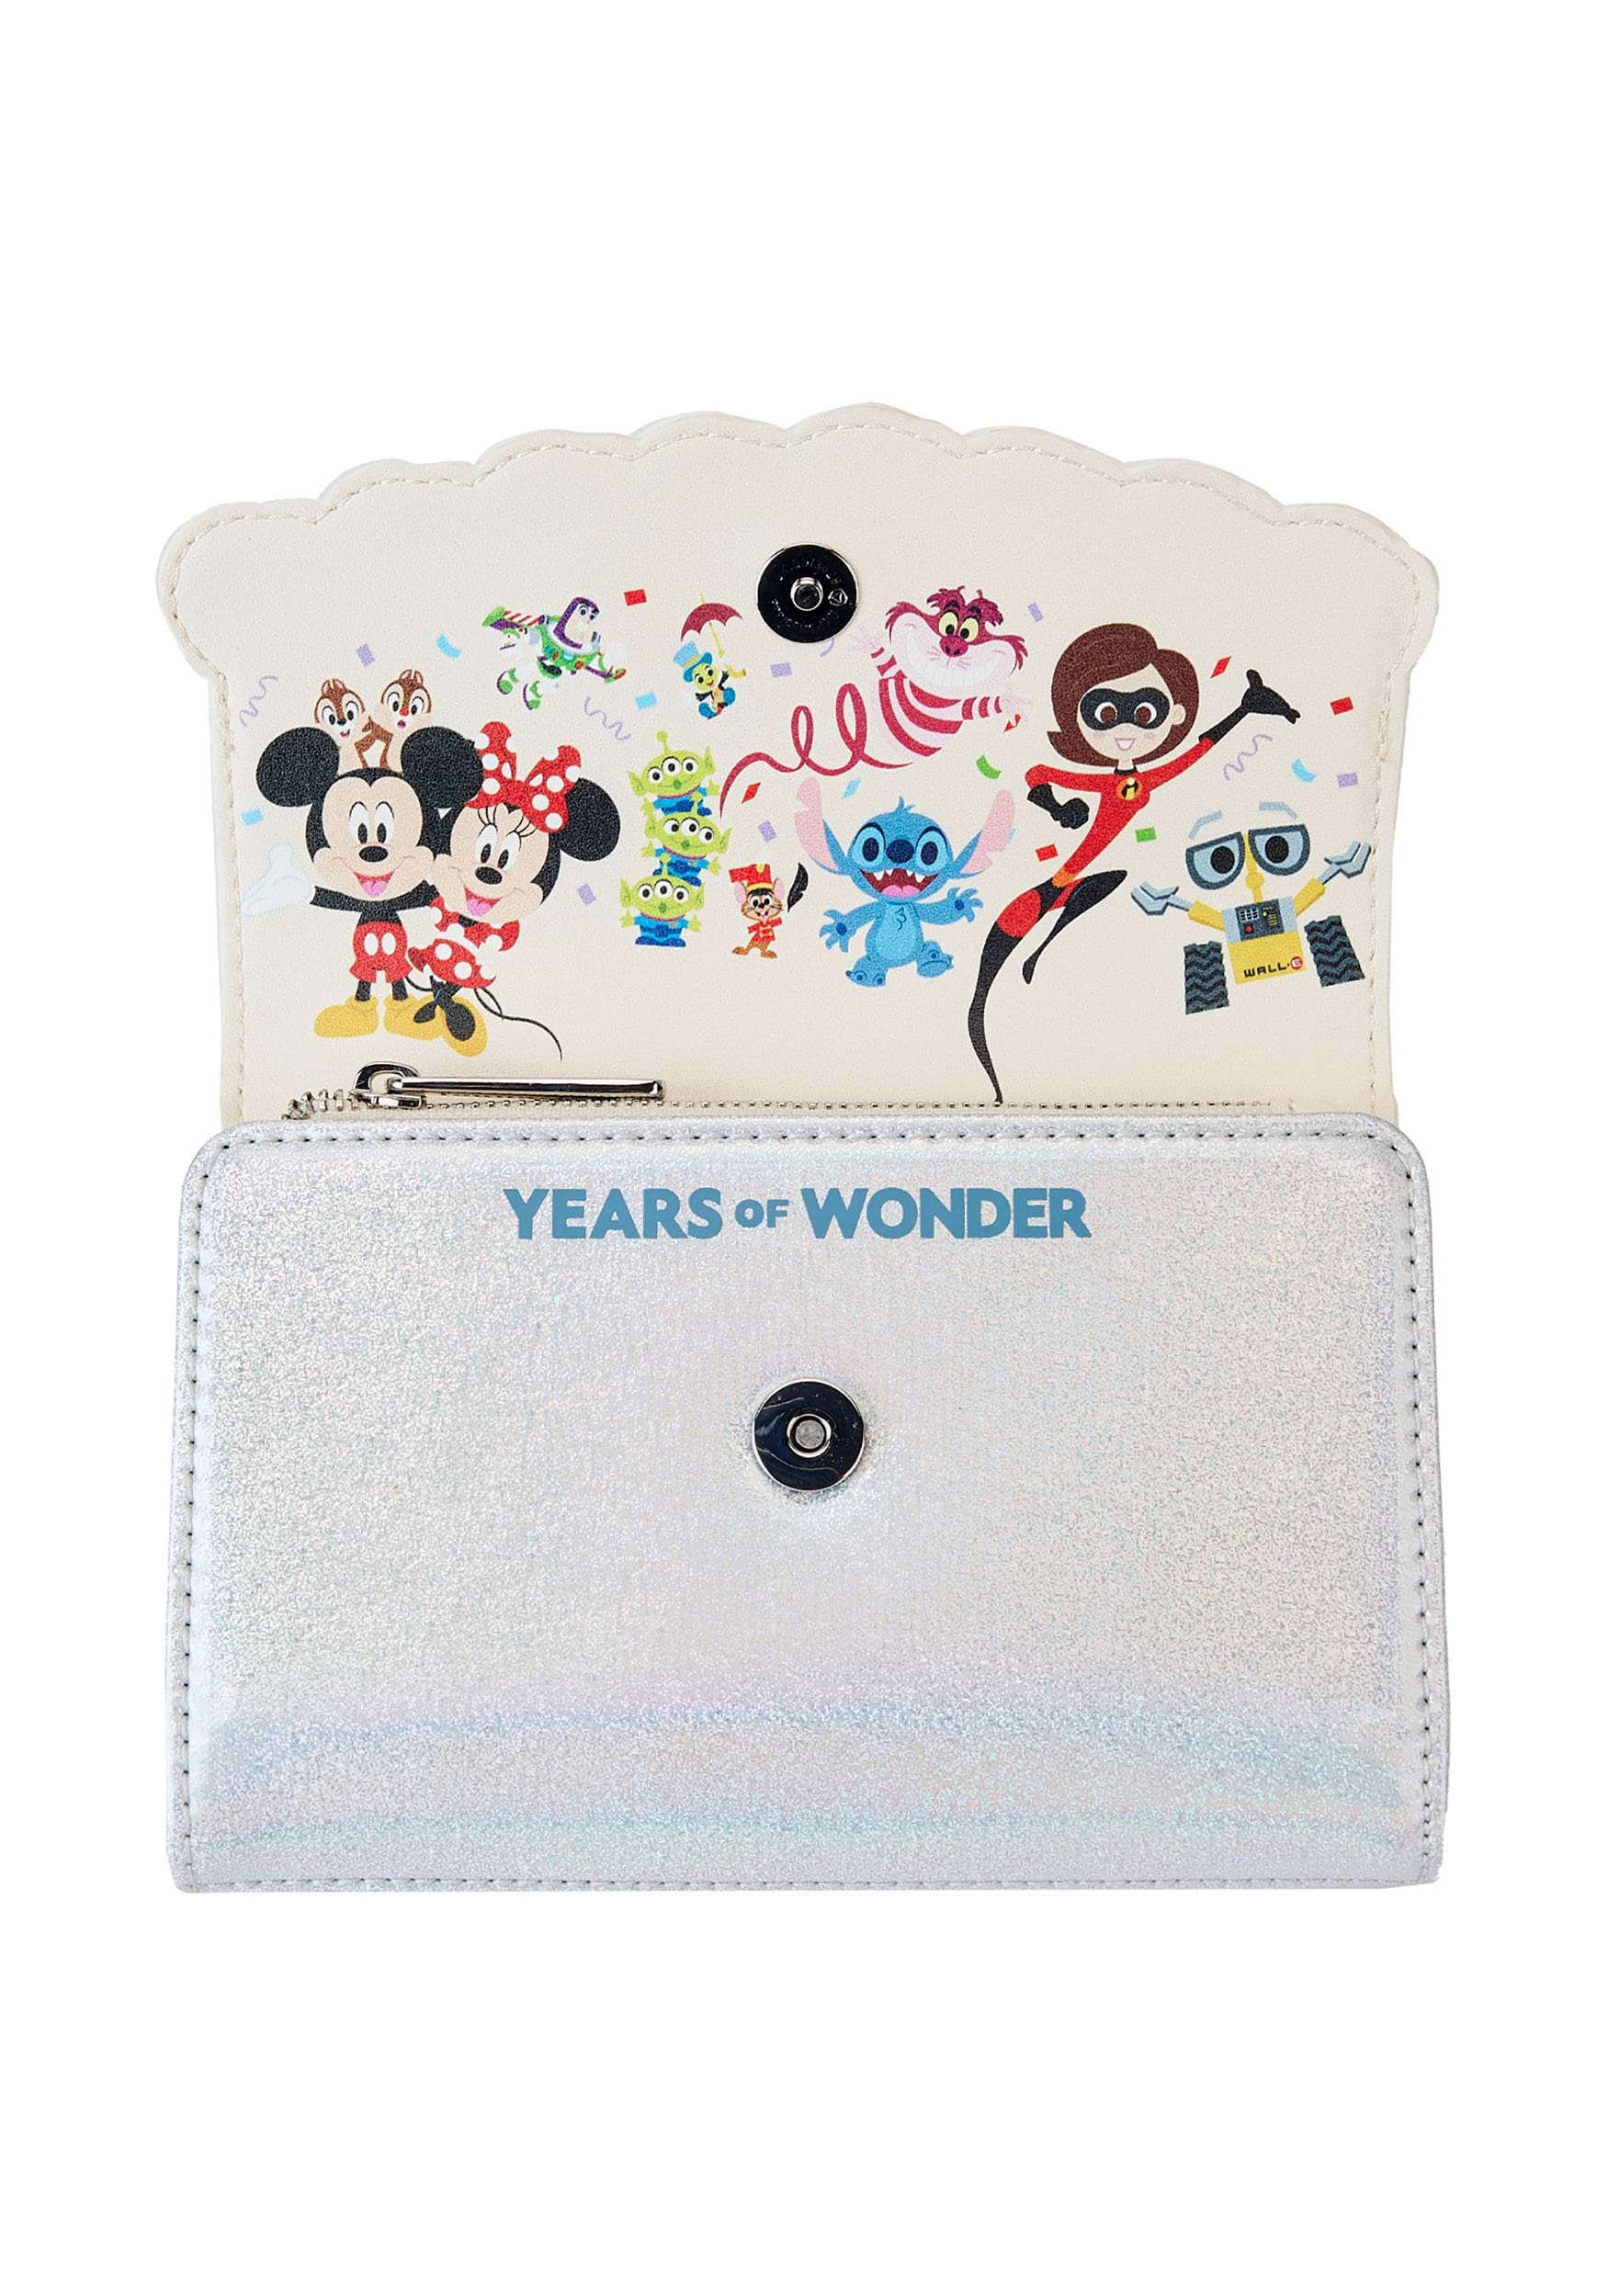 Disney Parks Snap Close Tri-fold Wallet Credit Card Case Mickey Mouse